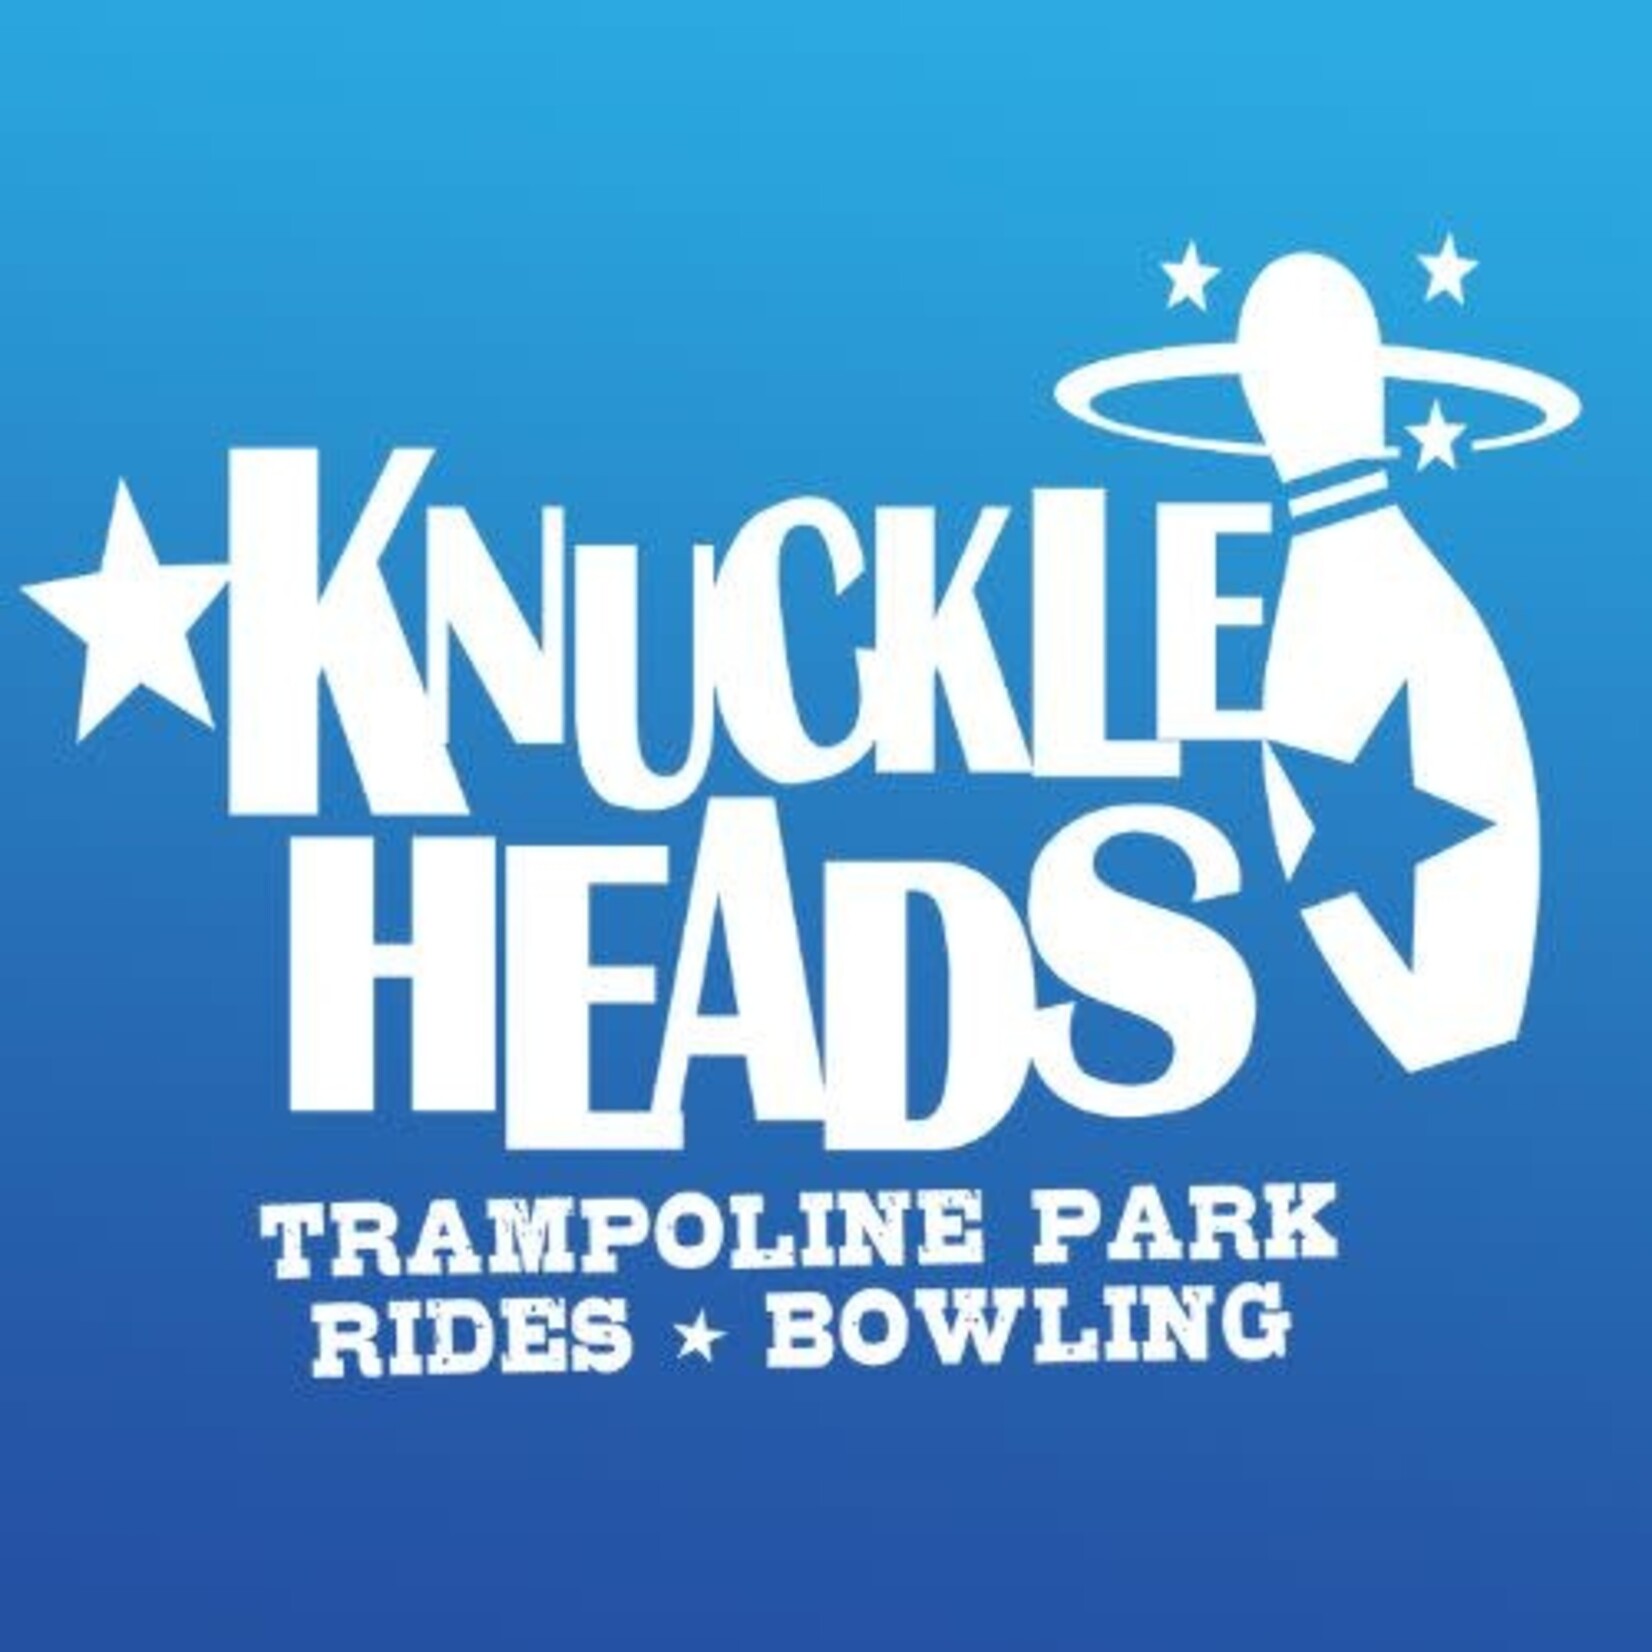 Knuckleheads-Wisconsin Dells Knuckleheads-Wisconsin Dells $7.50 2-hour Jumping Pillow wristband